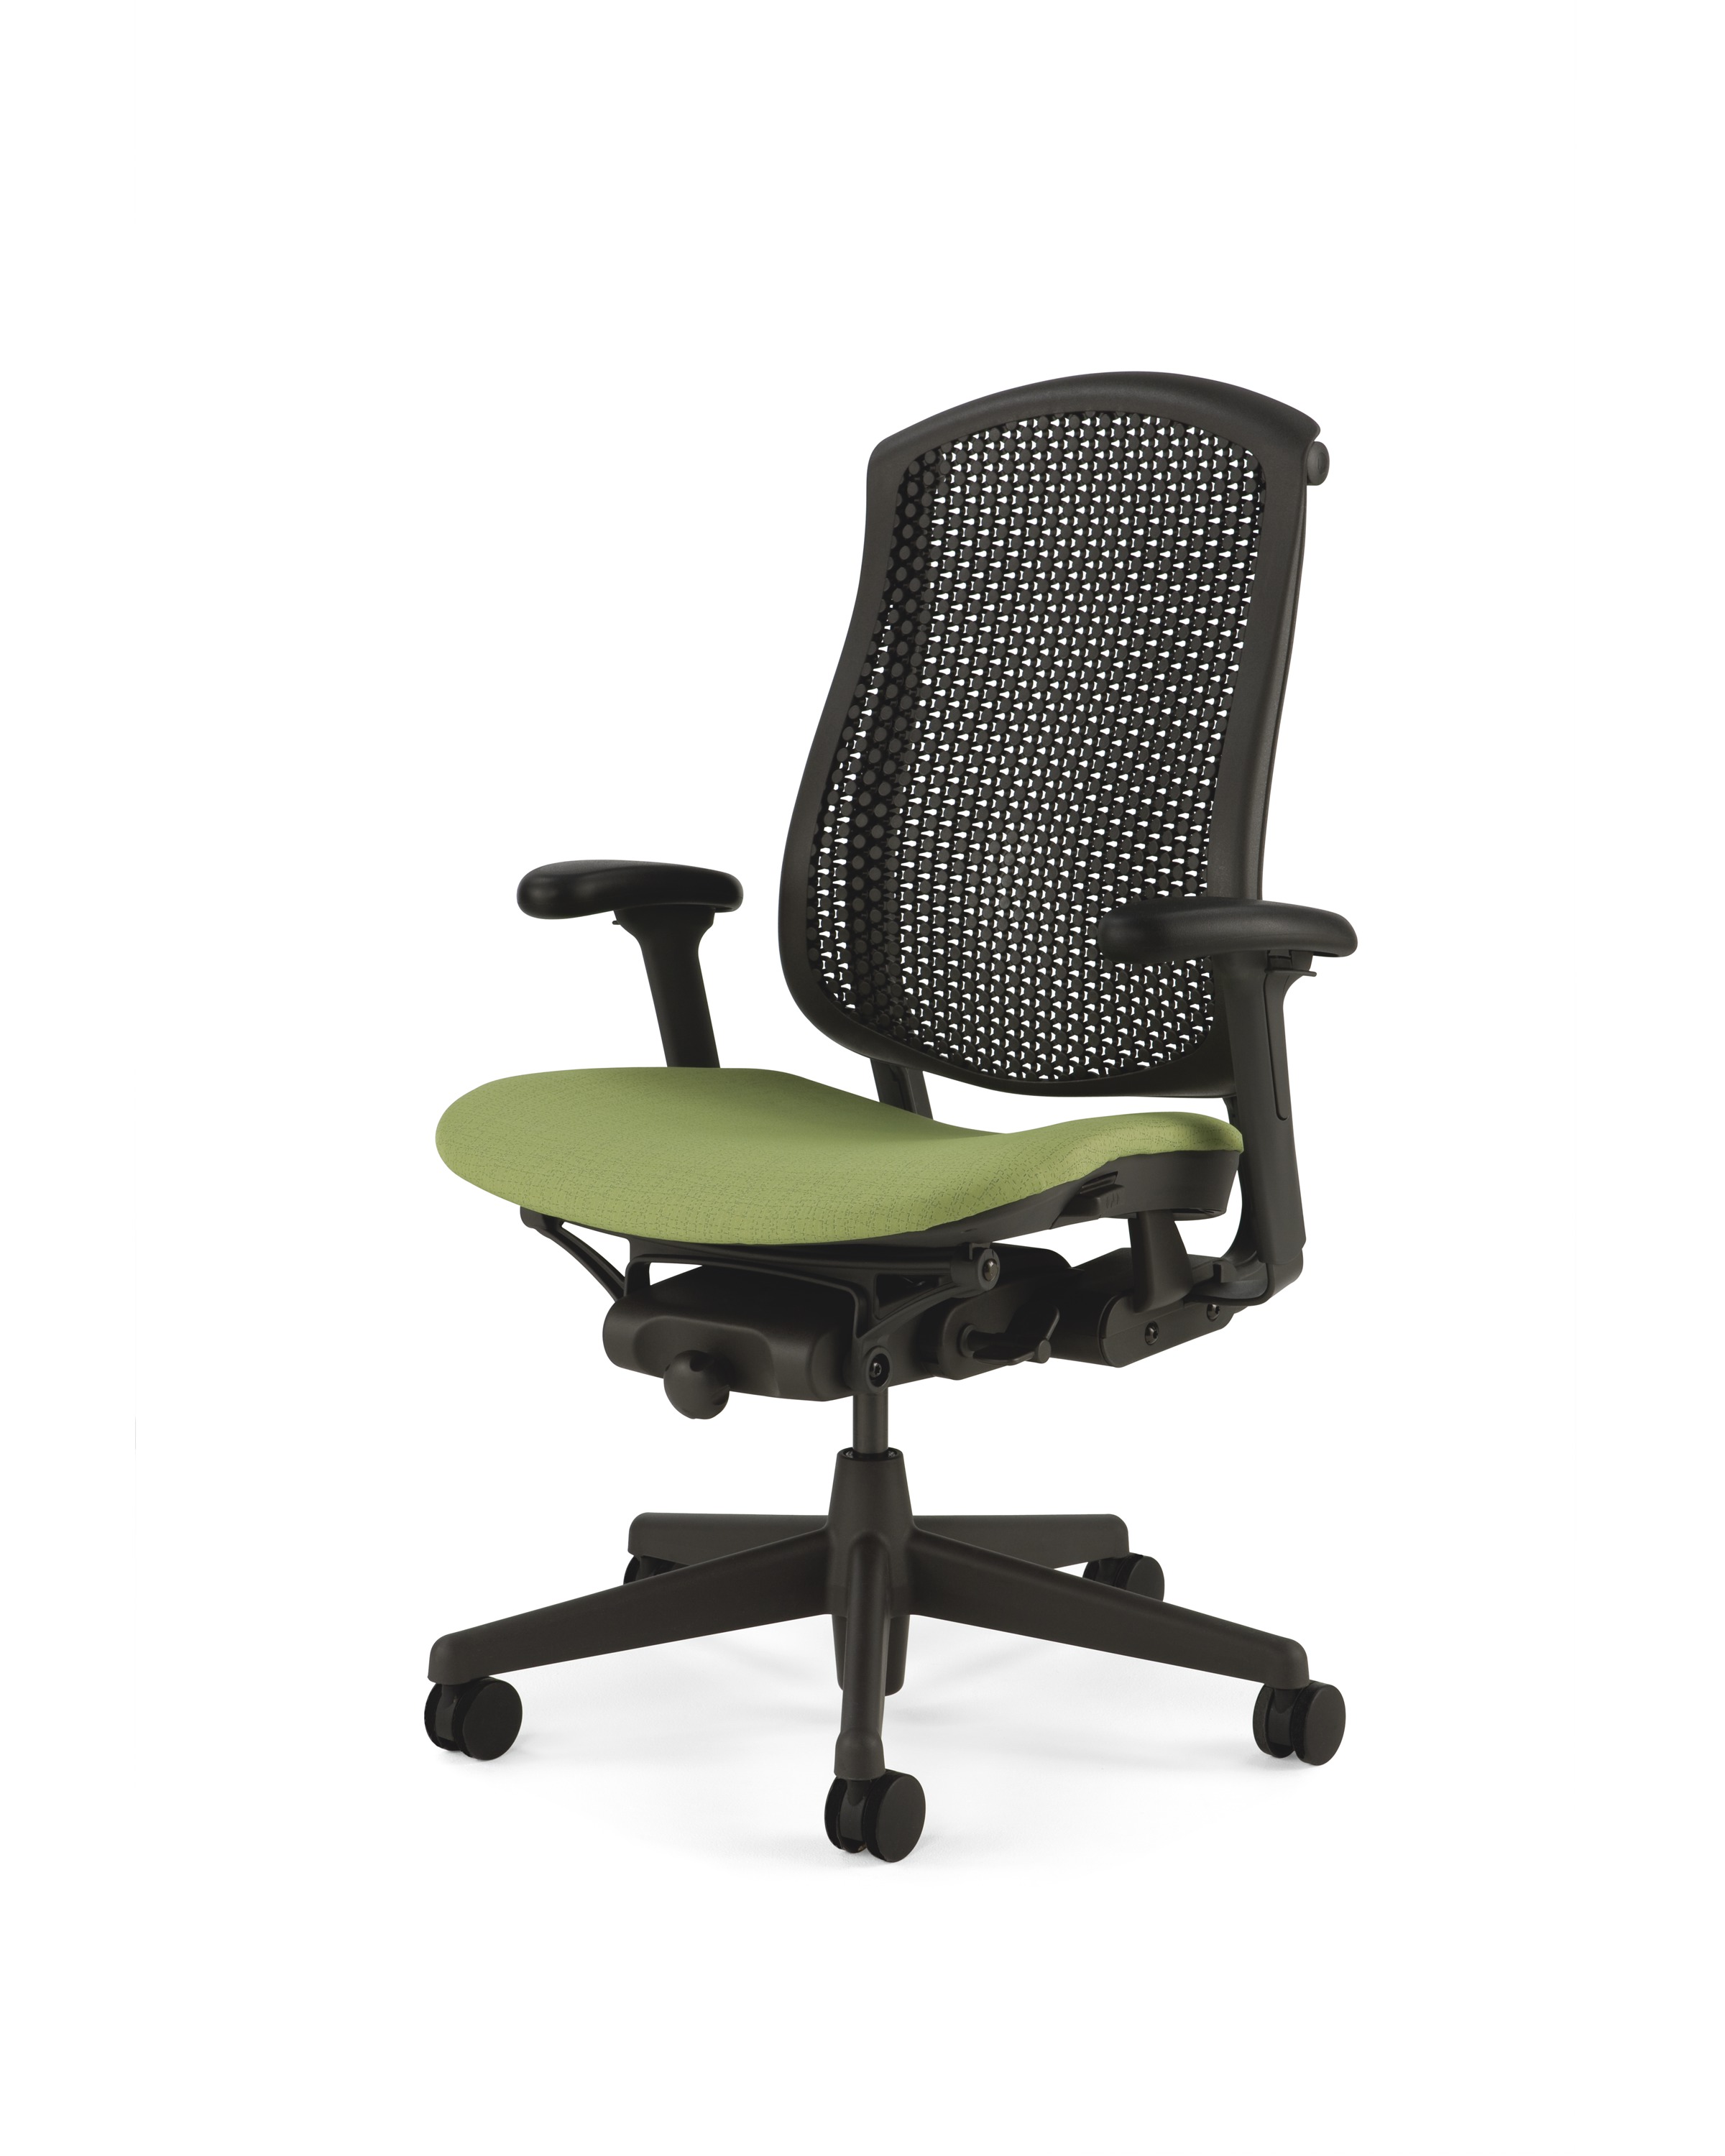 Celle Chair with Black Back and Green Seat